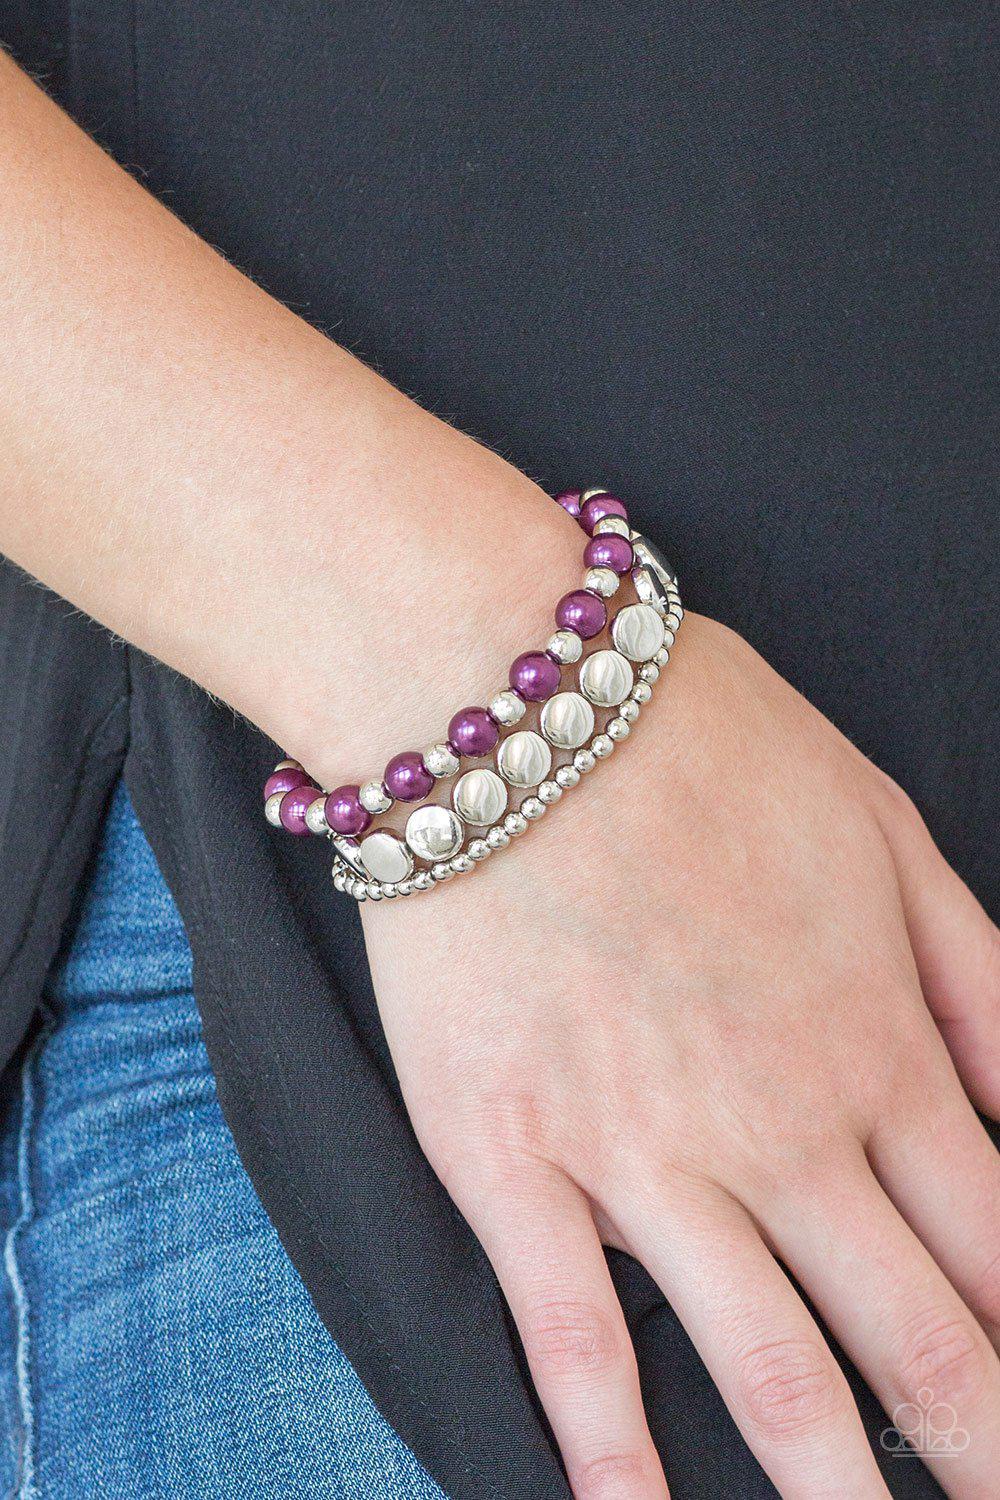 Girly Girl Glamour Silver and Purple Bracelet Set - Paparazzi Accessories-CarasShop.com - $5 Jewelry by Cara Jewels